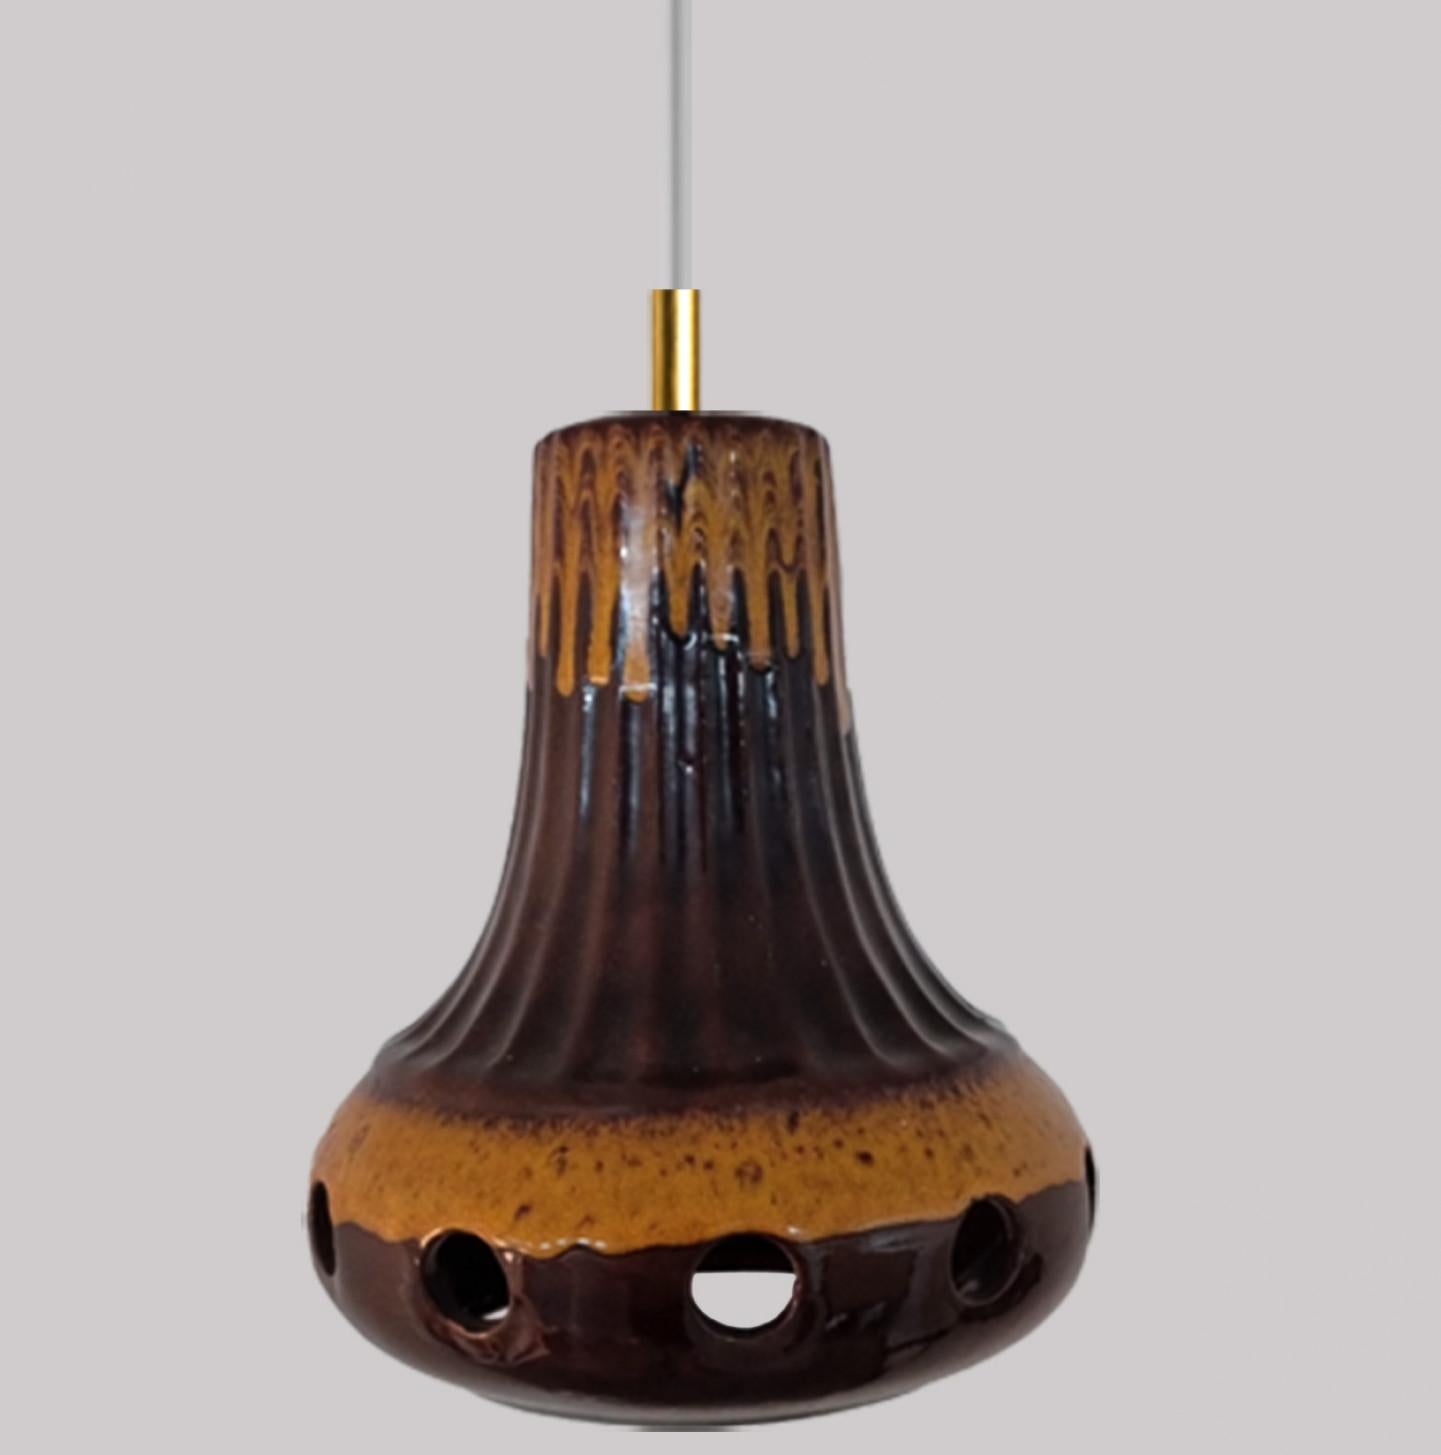 Set of Mixed Brown Glazed Ceramic Pendant Lights, Germany, 1970s For Sale 4